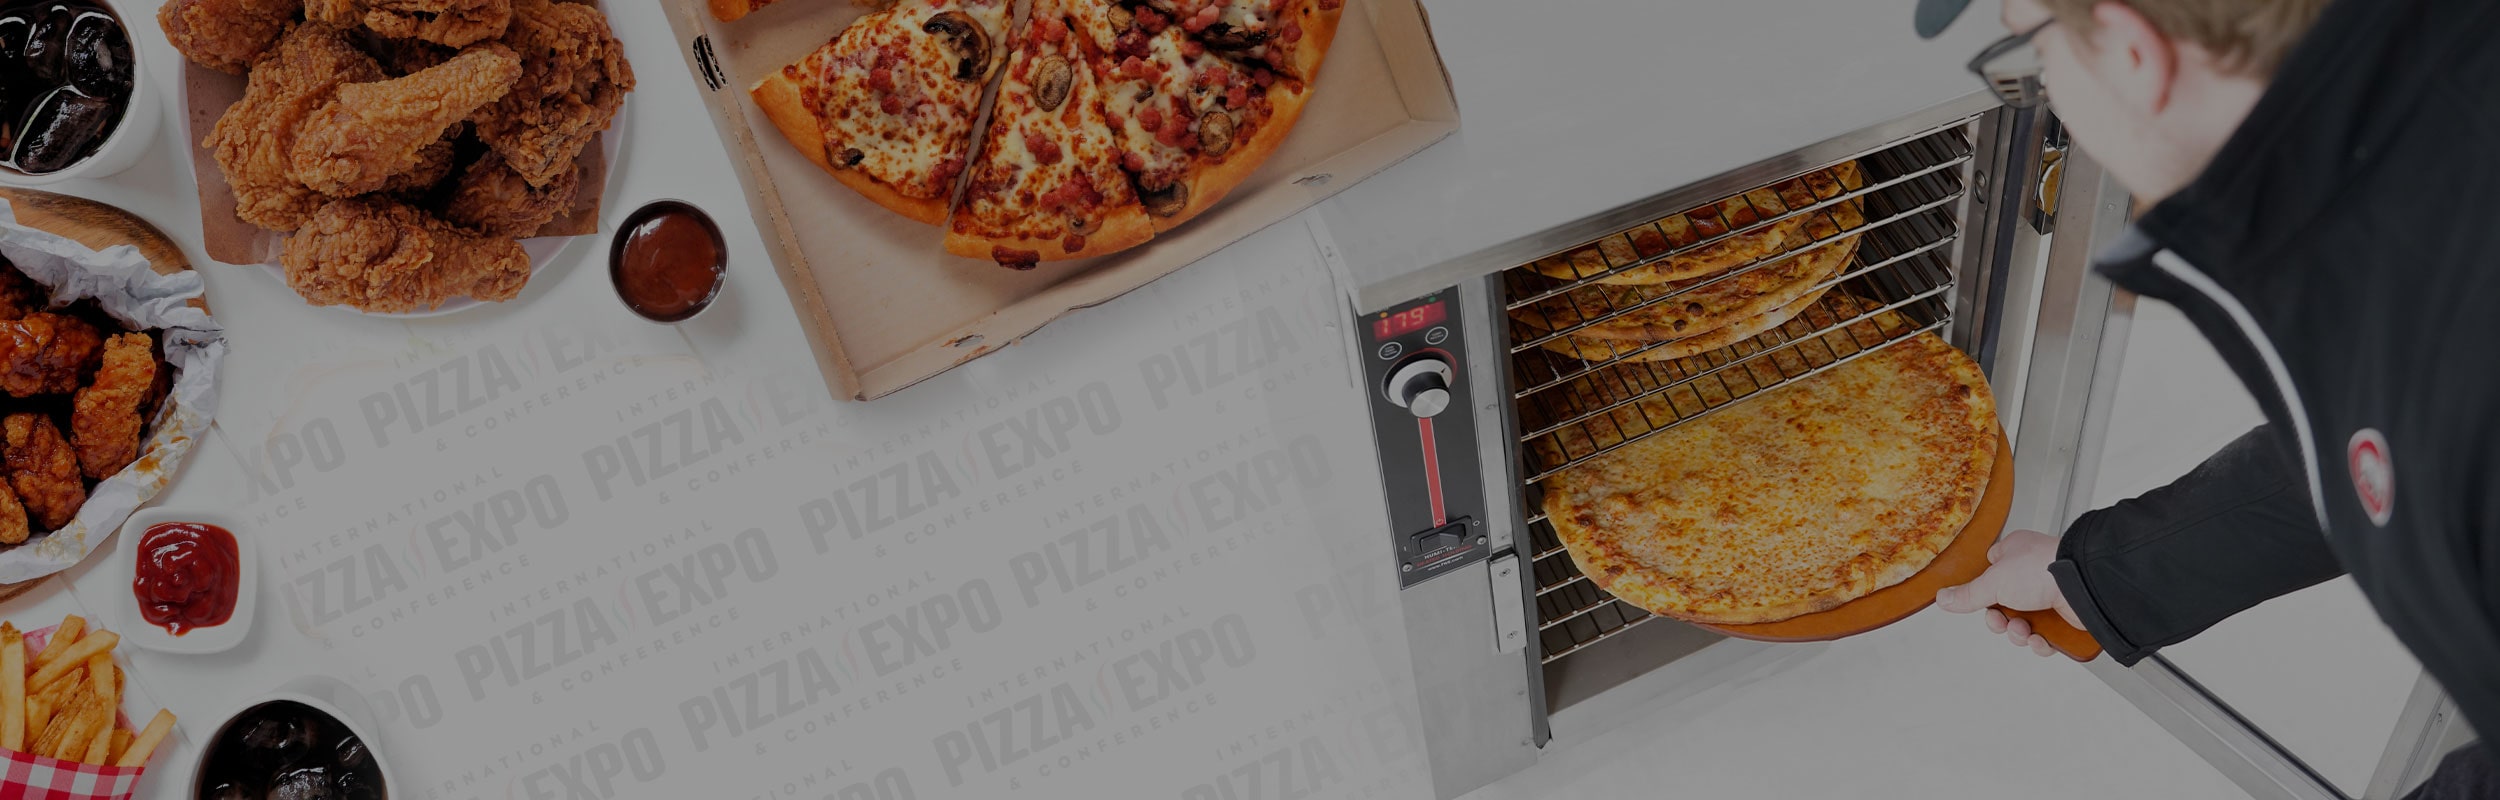 Join FWE at Pizza Expo by stopping by Booth # 1657 on March 28-30 in Las Vegas!